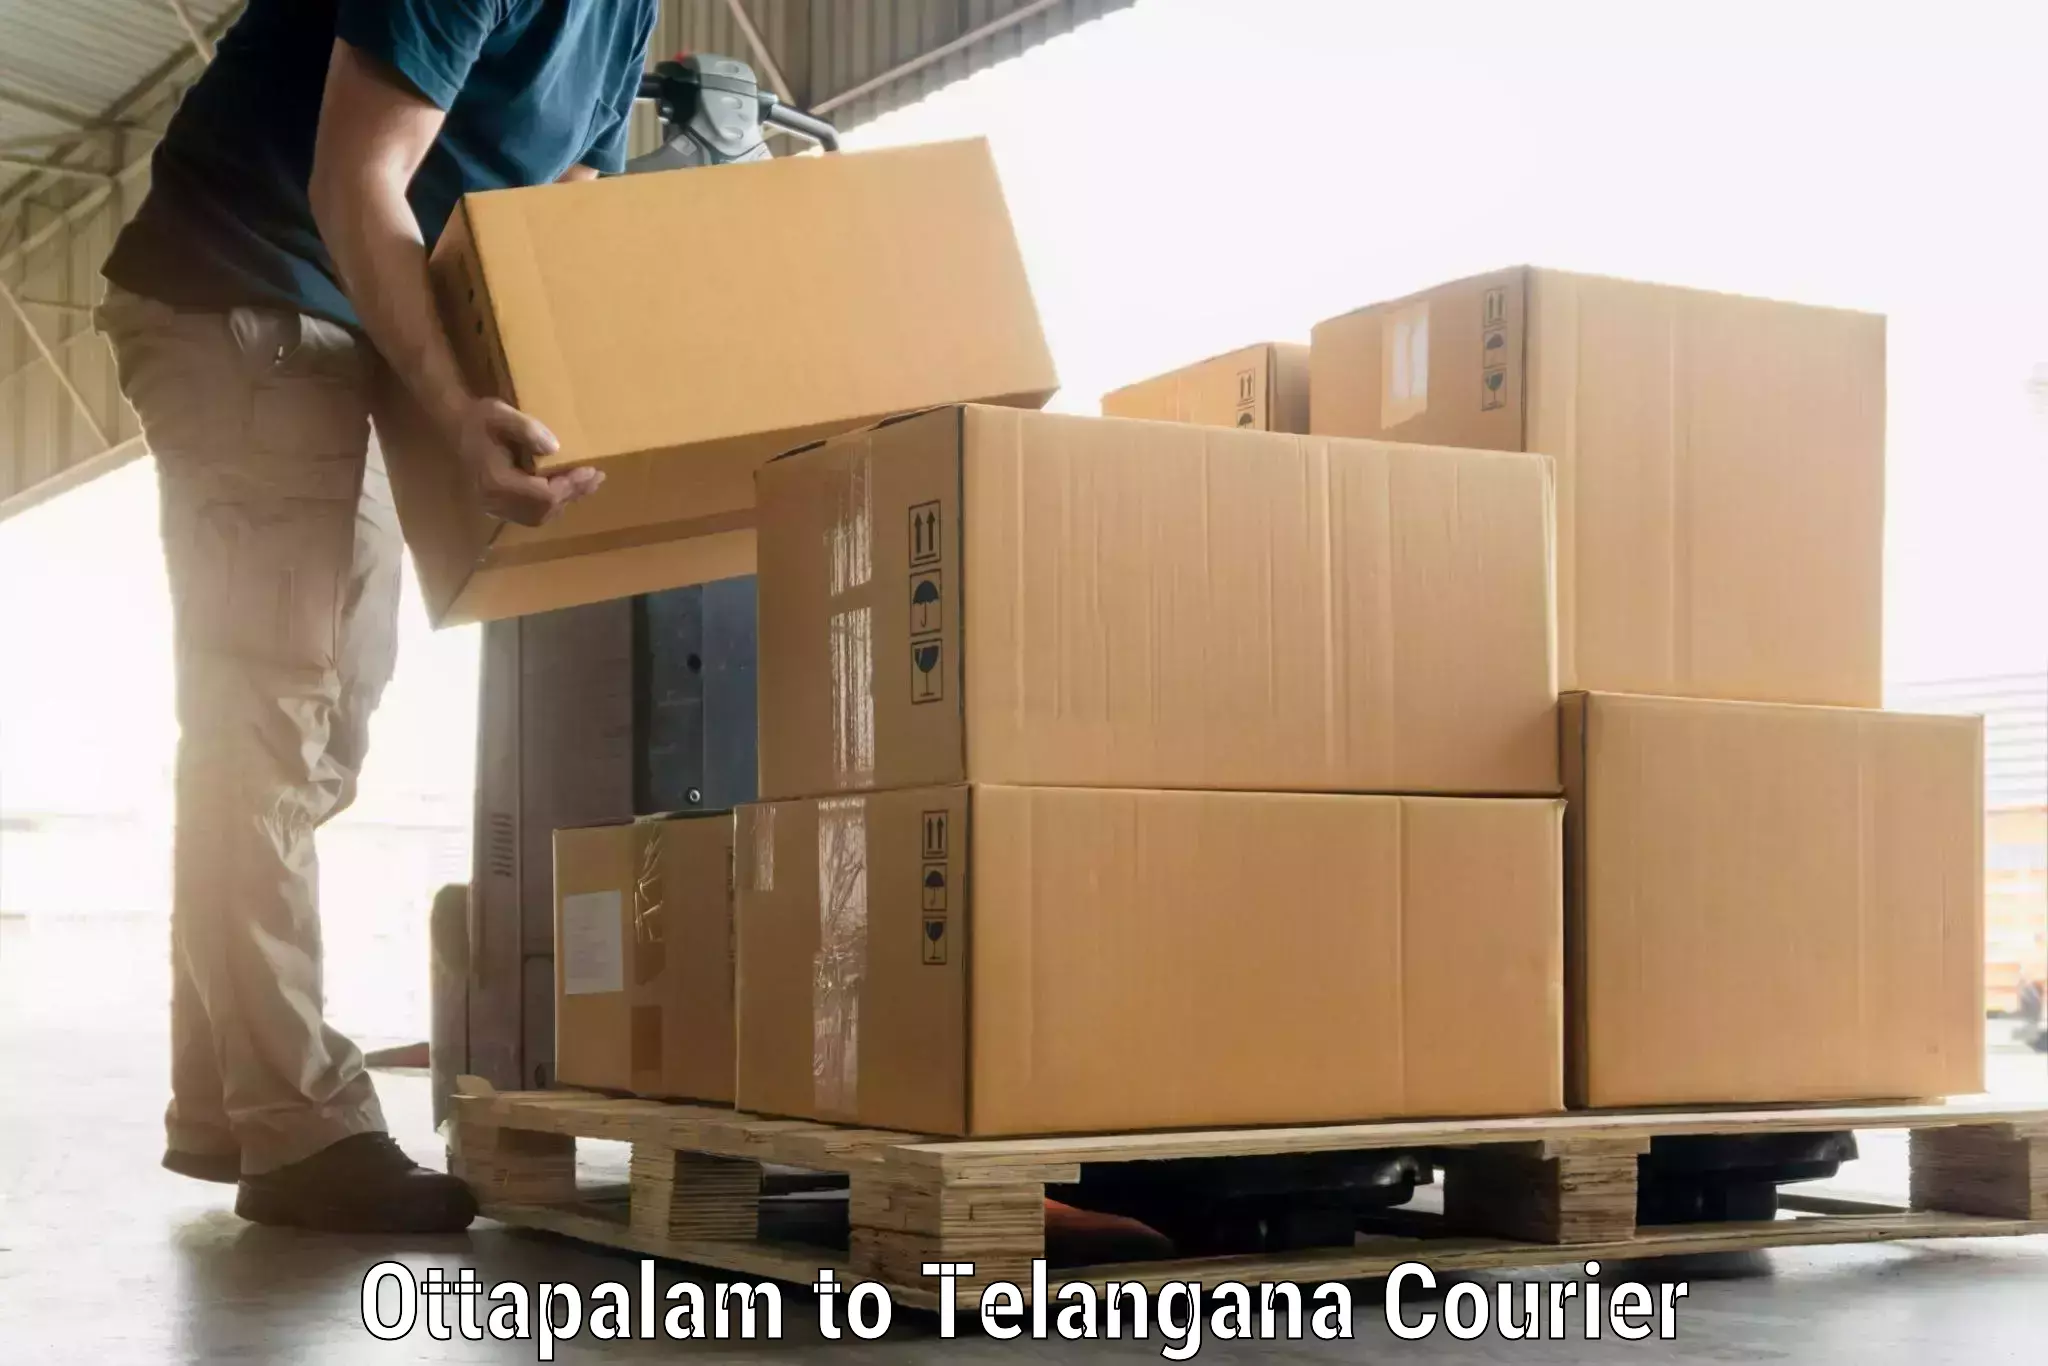 Luggage delivery estimate Ottapalam to Netrang